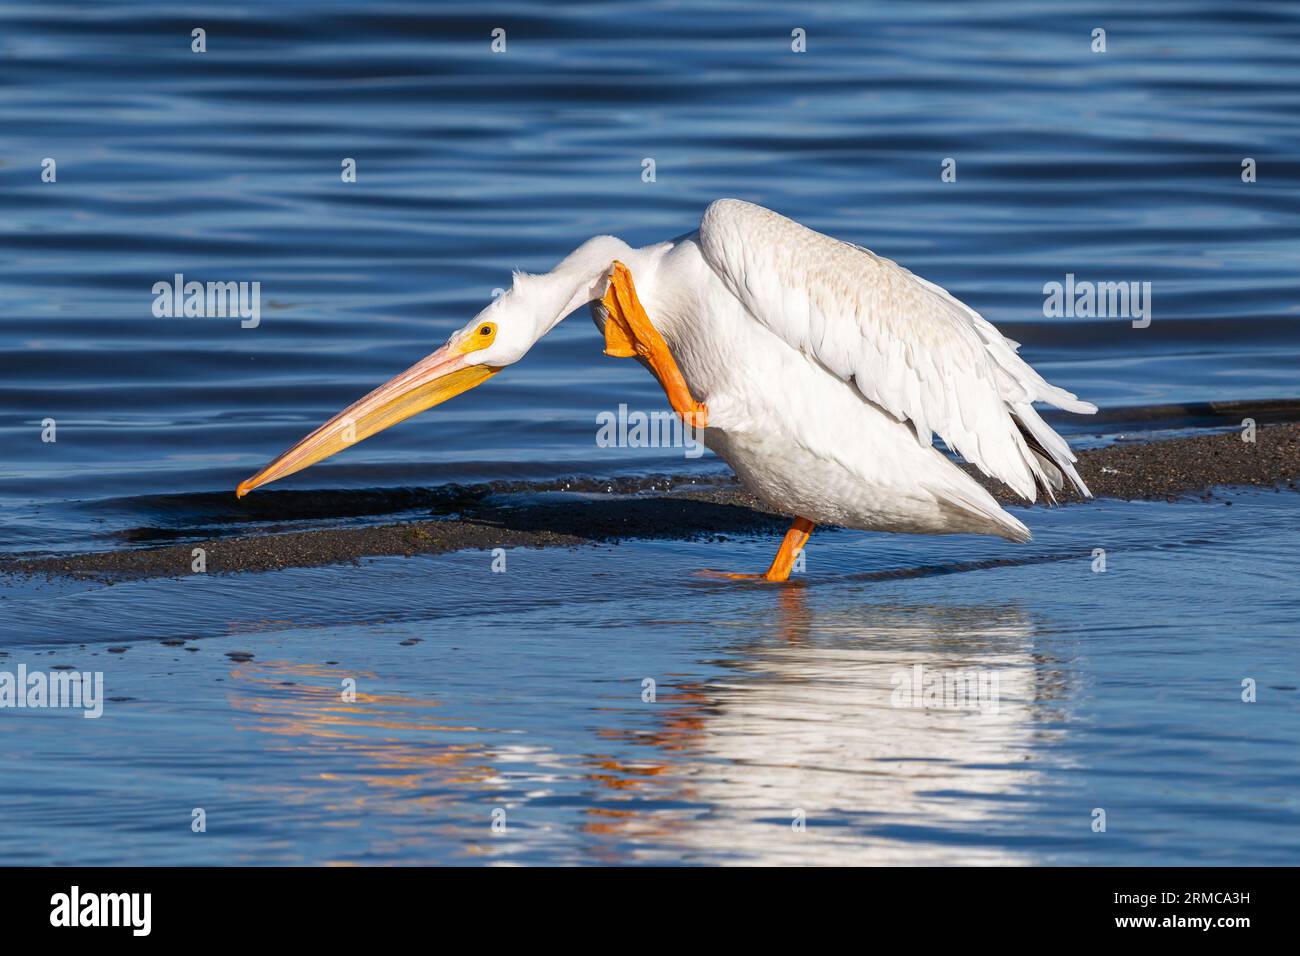 An American White Pelican standing in the shallow waters of a blue lake scratching its neck with its webbed foot. Stock Photo